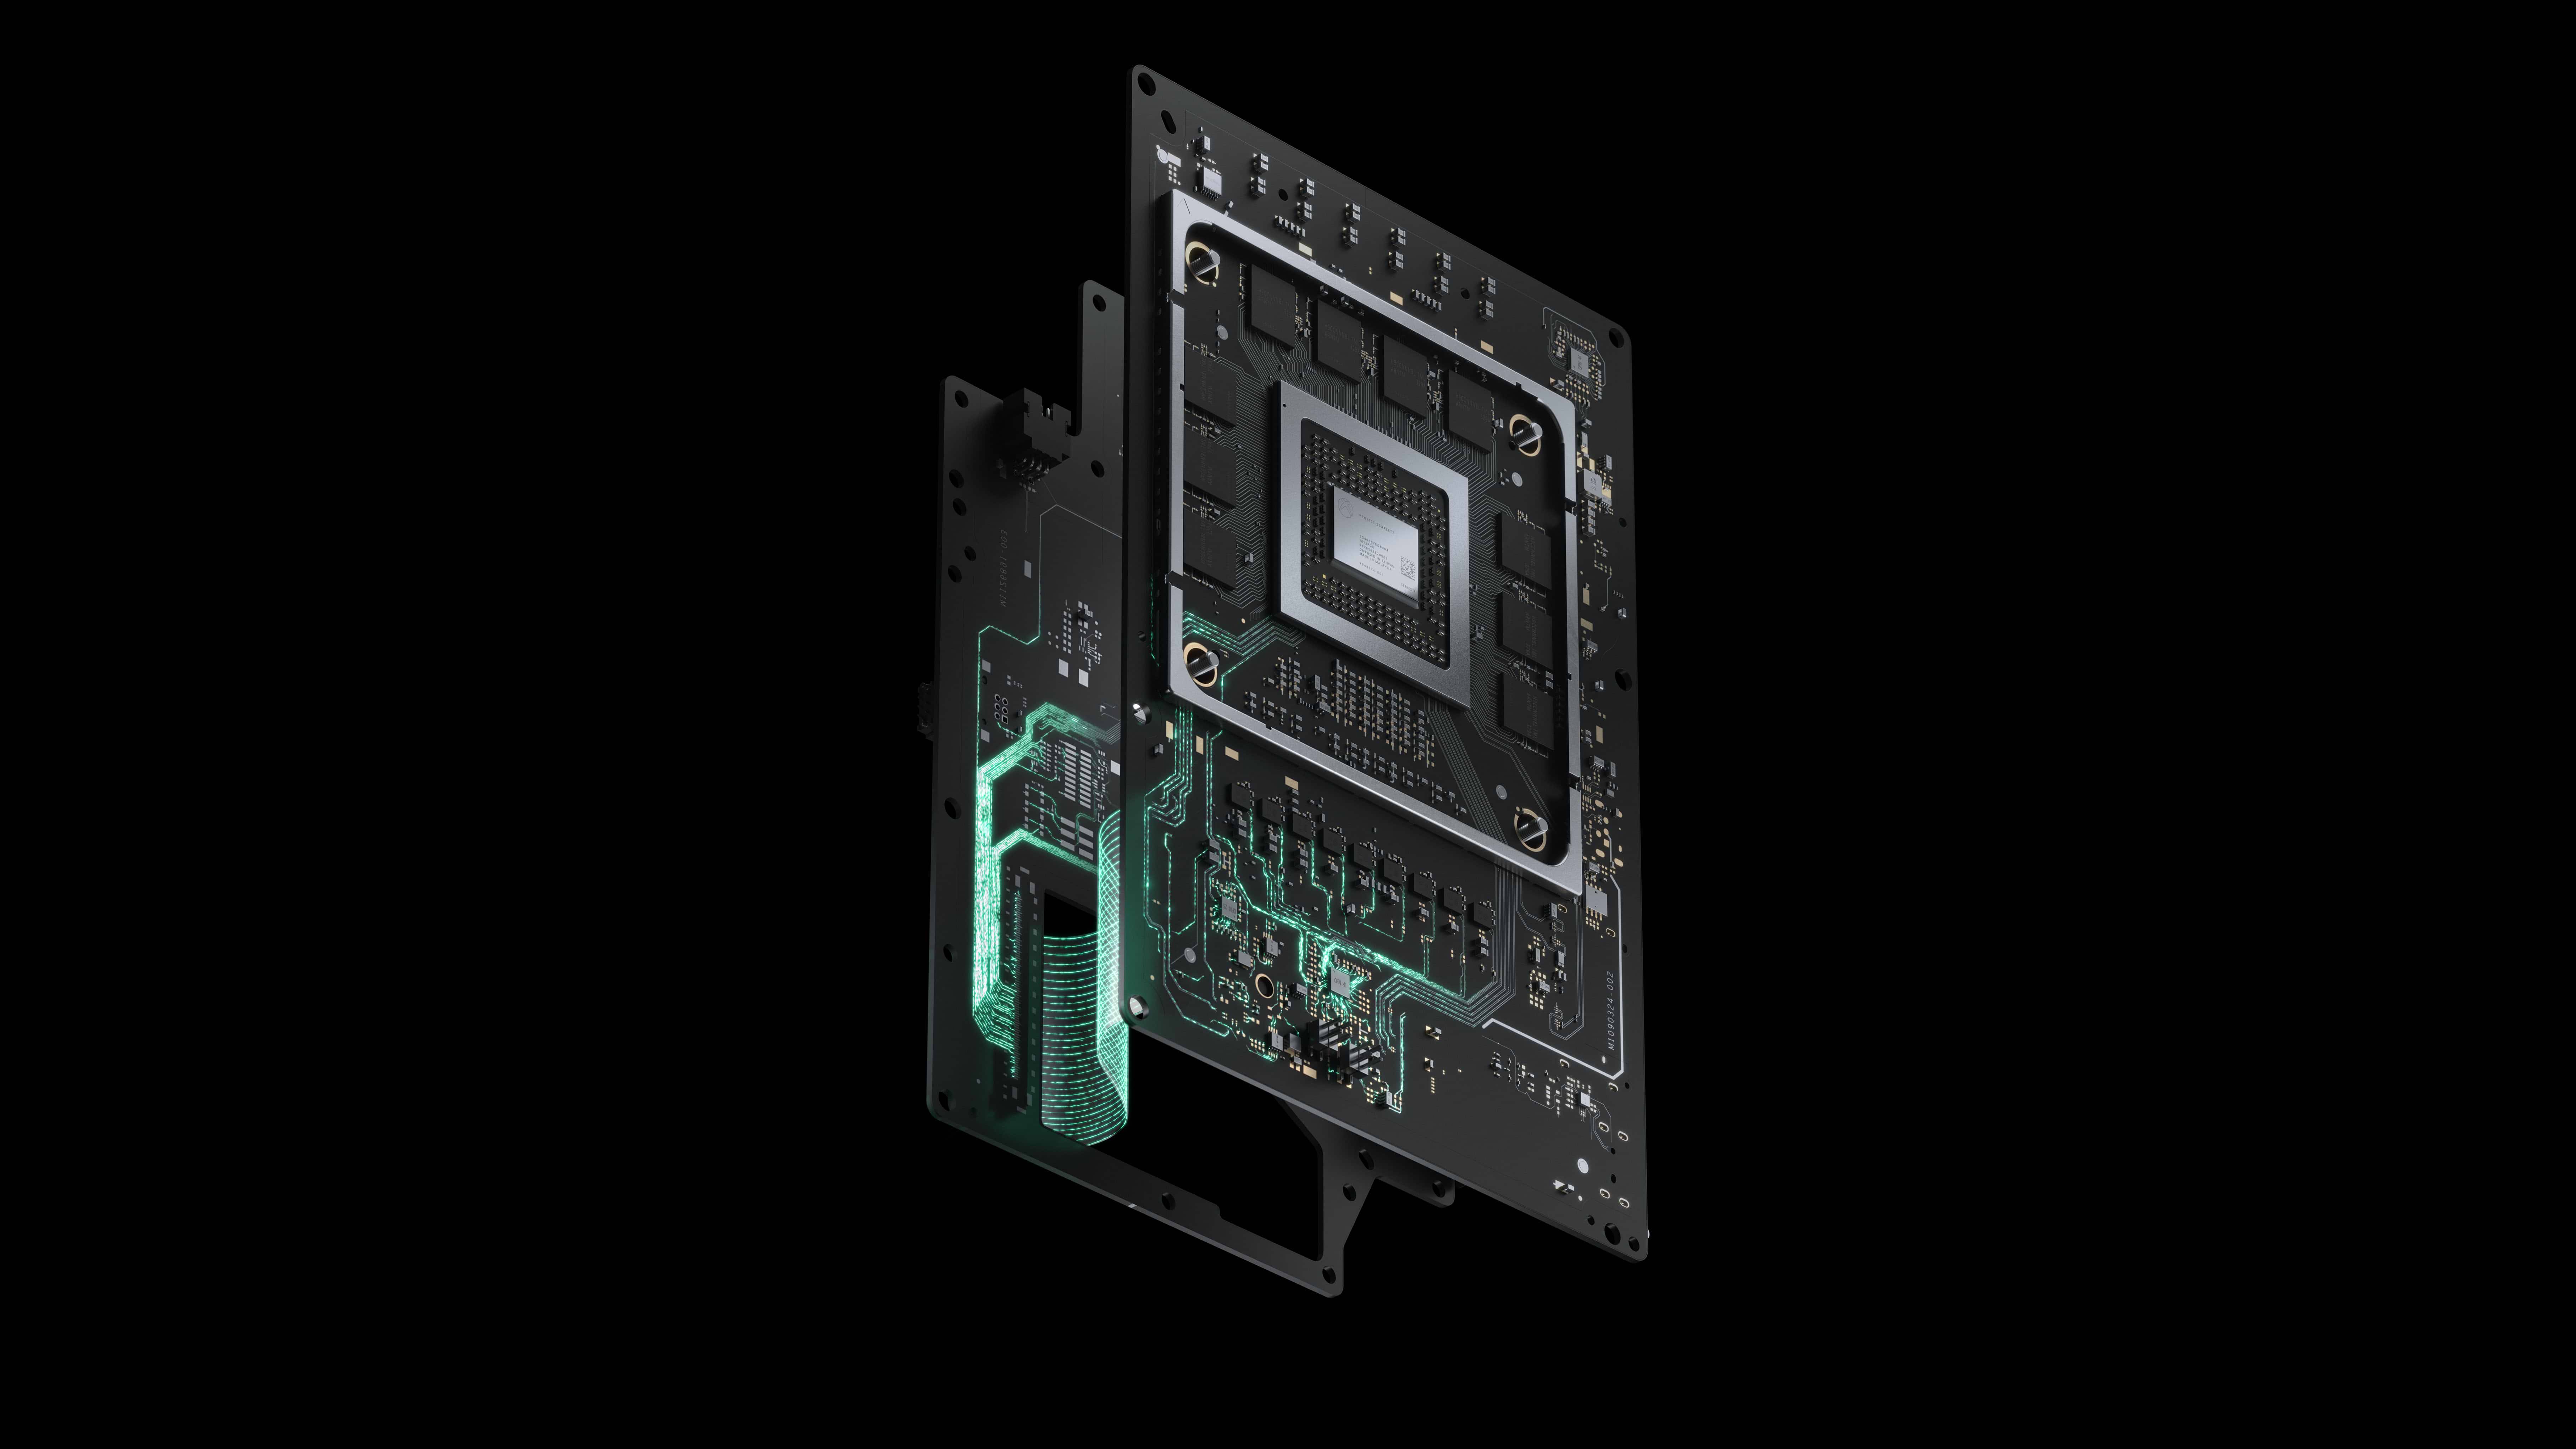 The all-new Xbox Series X